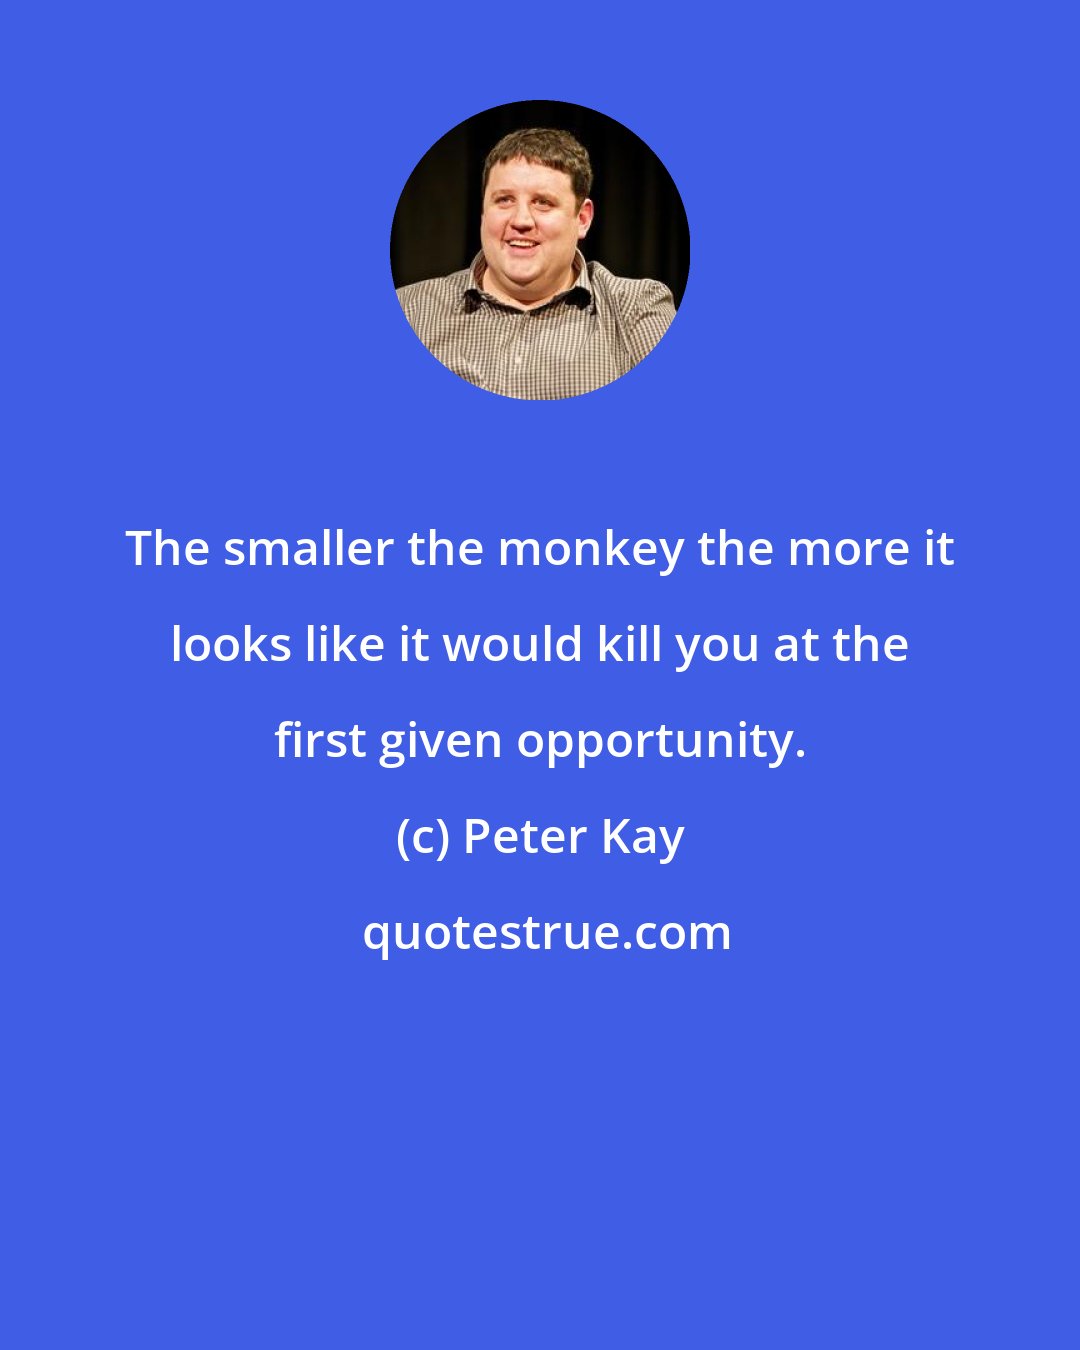 Peter Kay: The smaller the monkey the more it looks like it would kill you at the first given opportunity.